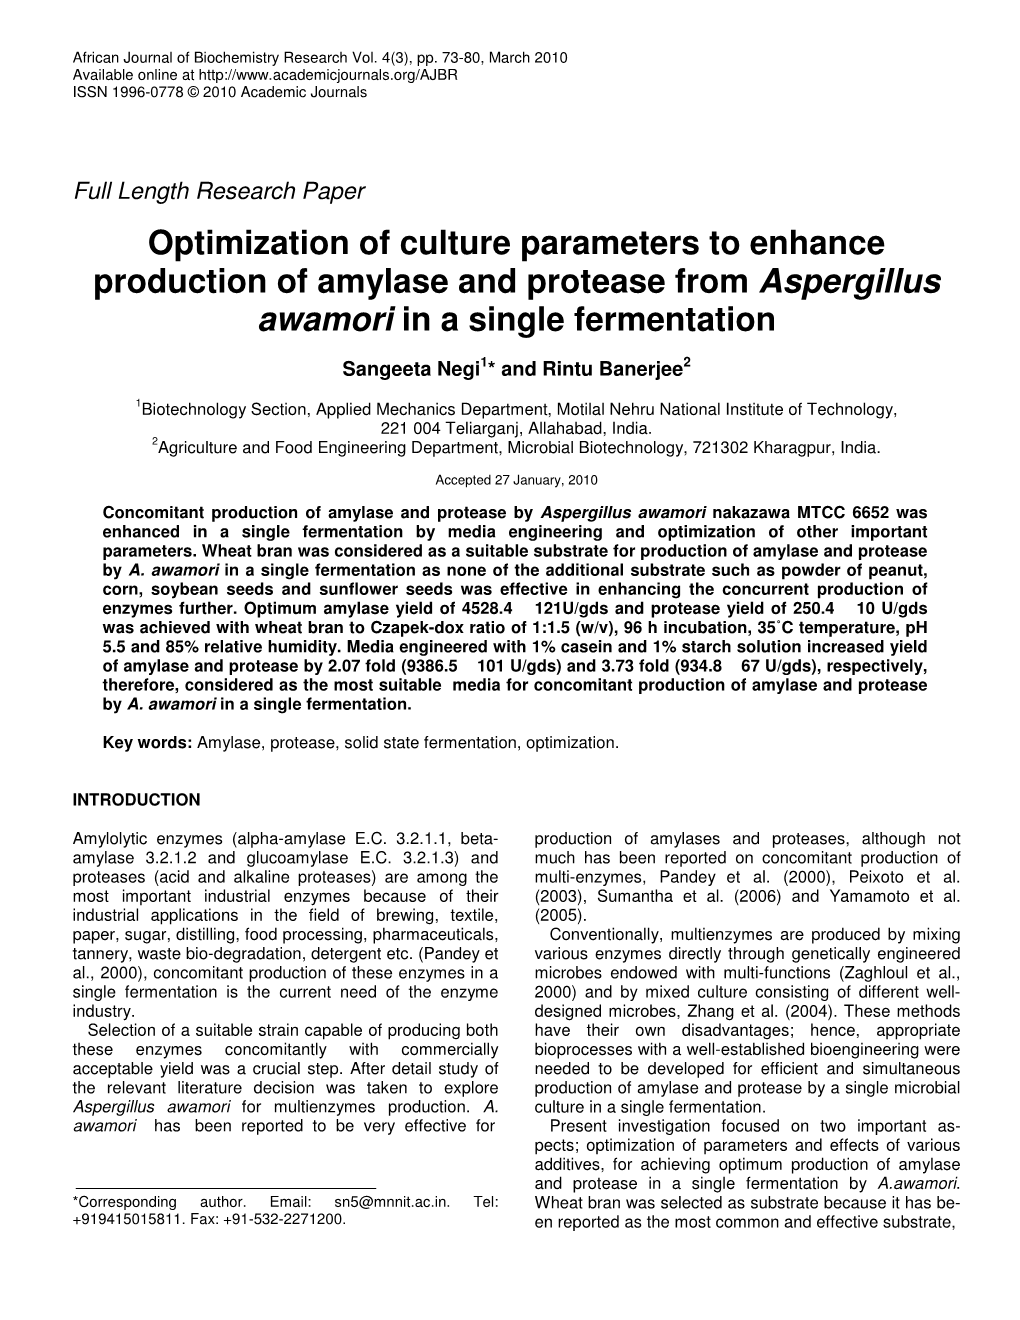 Optimization of Culture Parameters to Enhance Production of Amylase and Protease from Aspergillus Awamori in a Single Fermentation